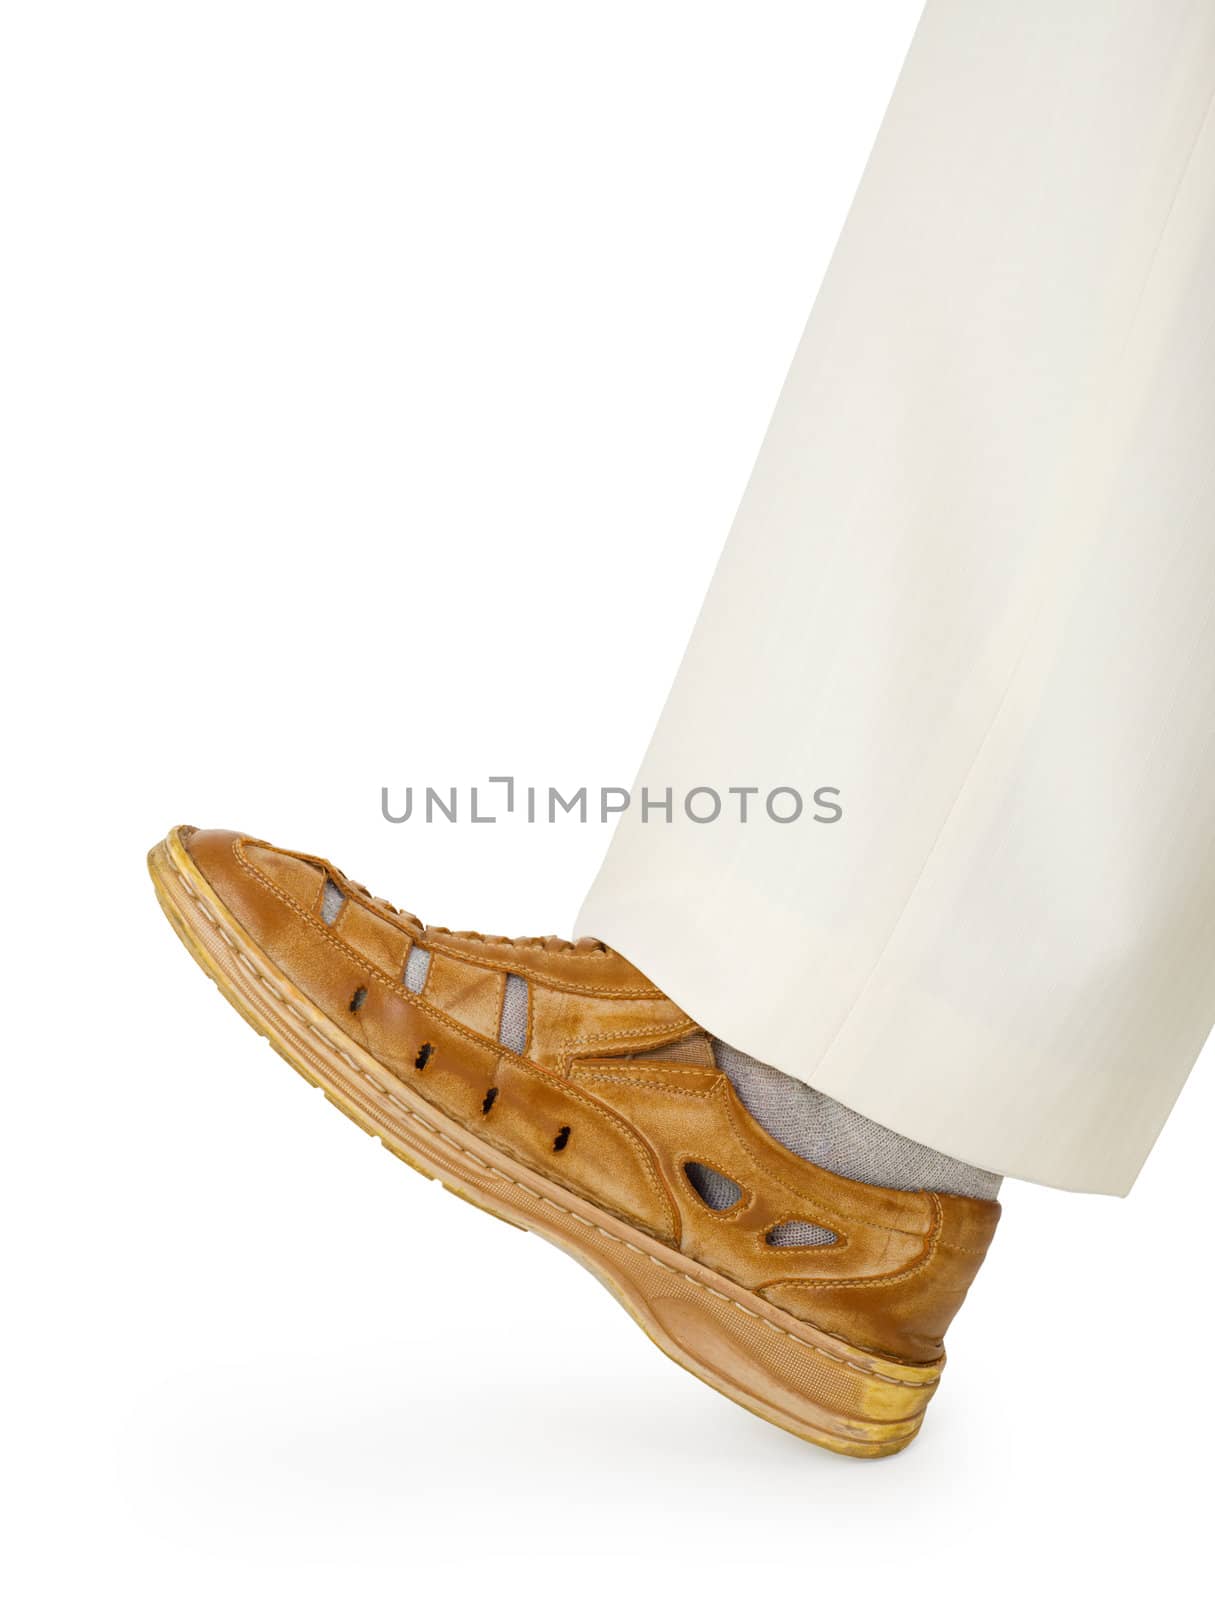 Man's leg on a white background - crushes